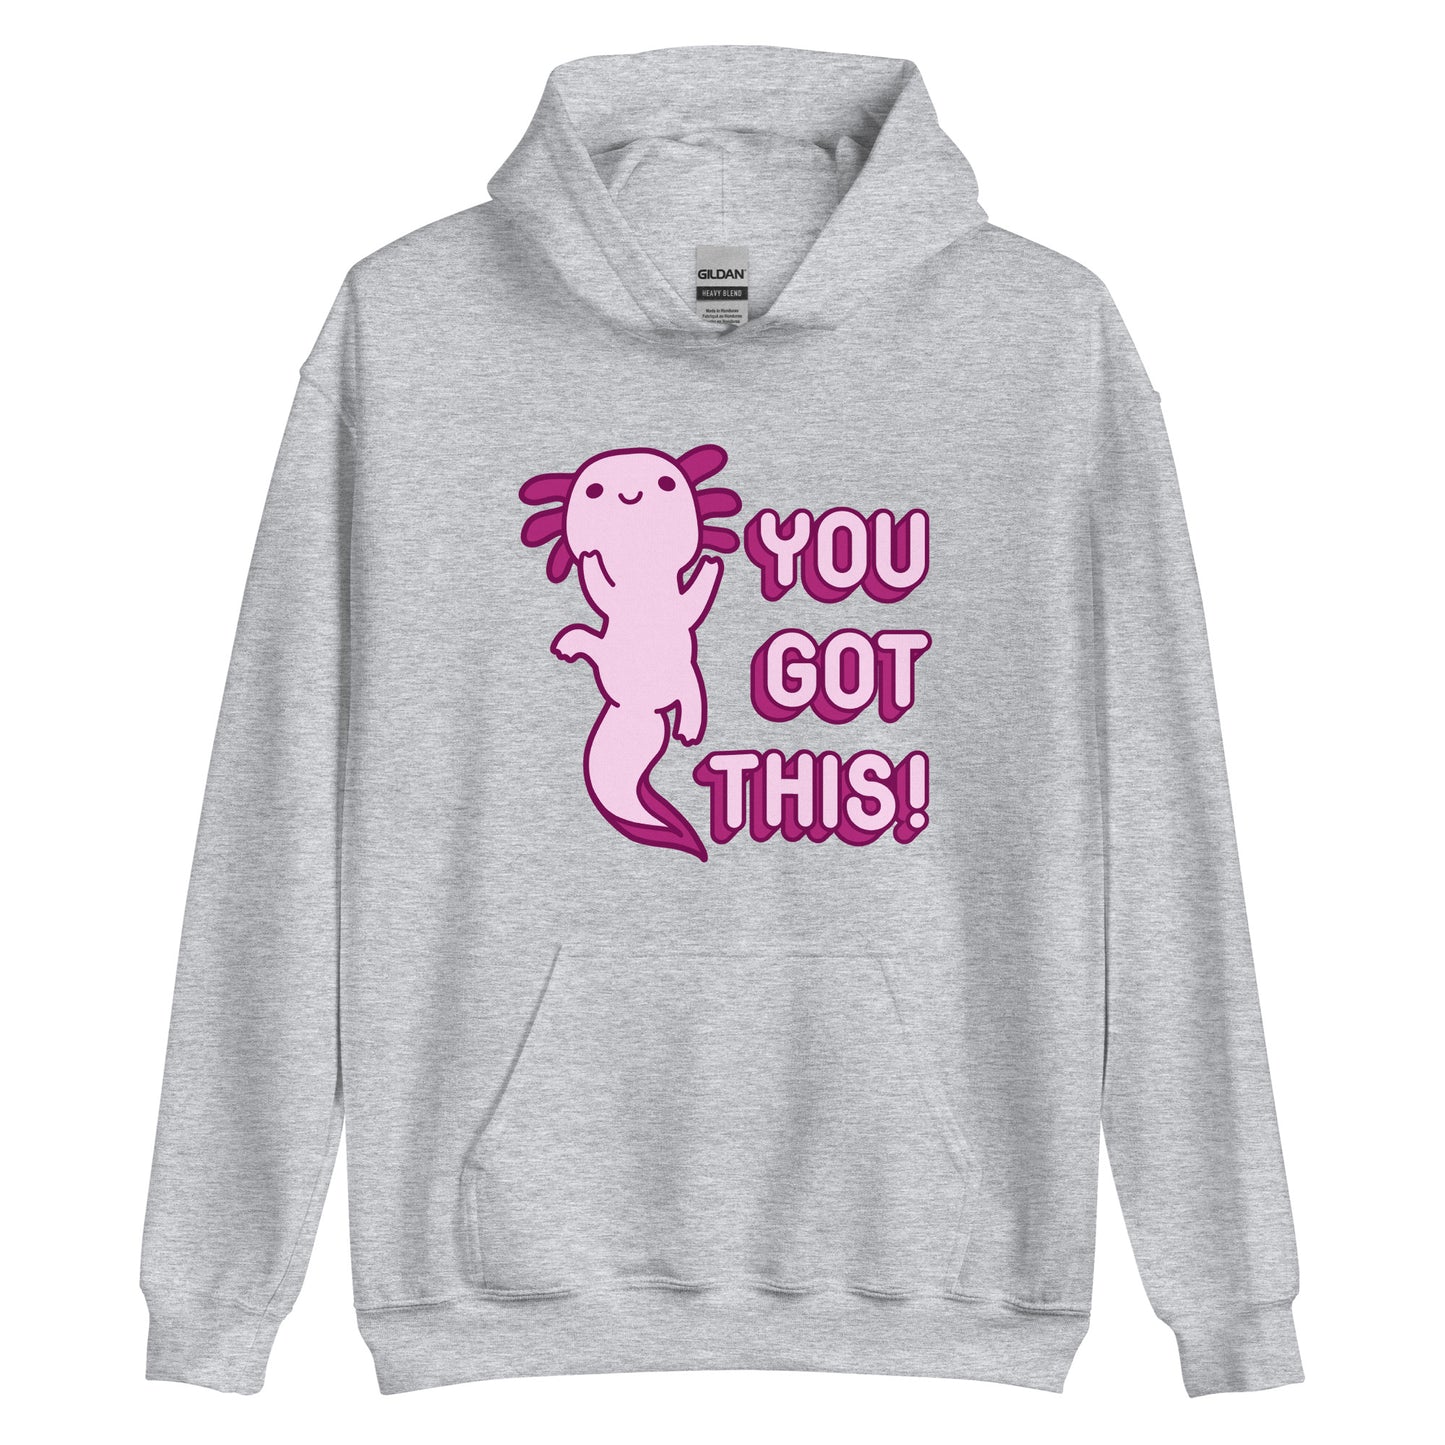 A light gray hooded sweatshirt with front pouch pocket featuring a picture of a pink axolotl and text reading "You Got This!" in pink bubble letters